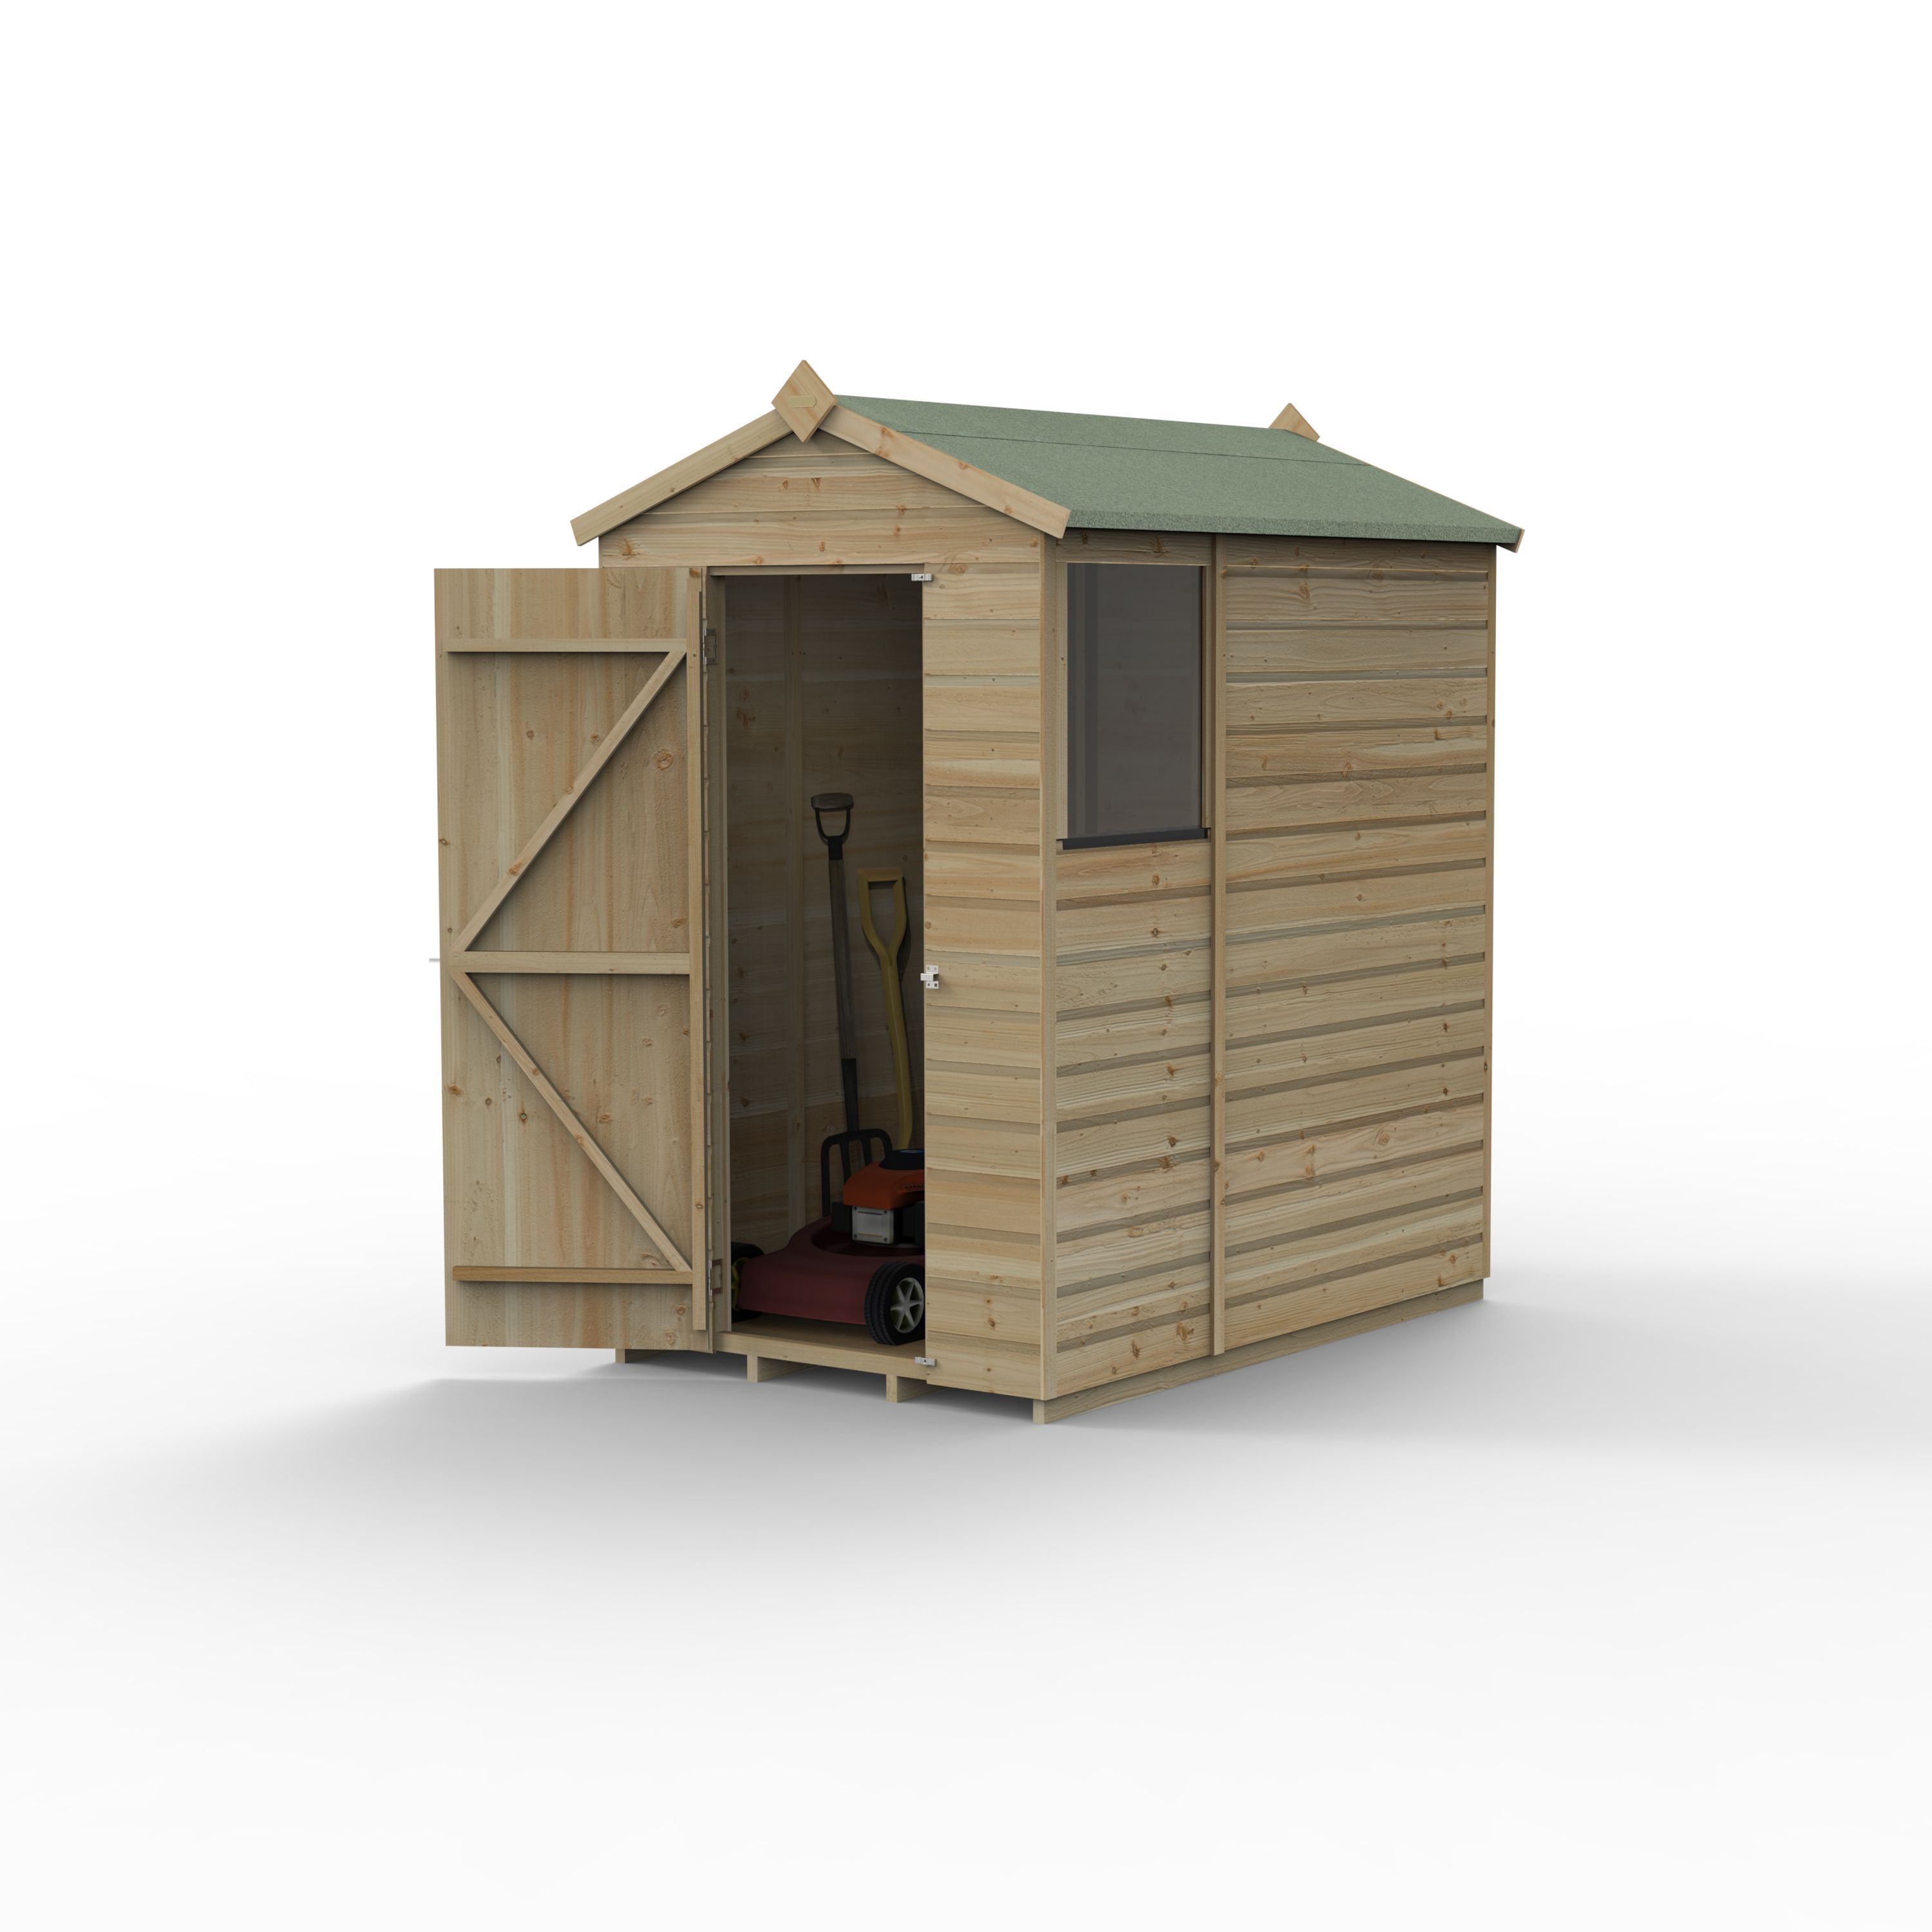 Forest Garden Beckwood 6x4 ft Apex Natural timber Wooden Shed with floor & 1 window (Base included)